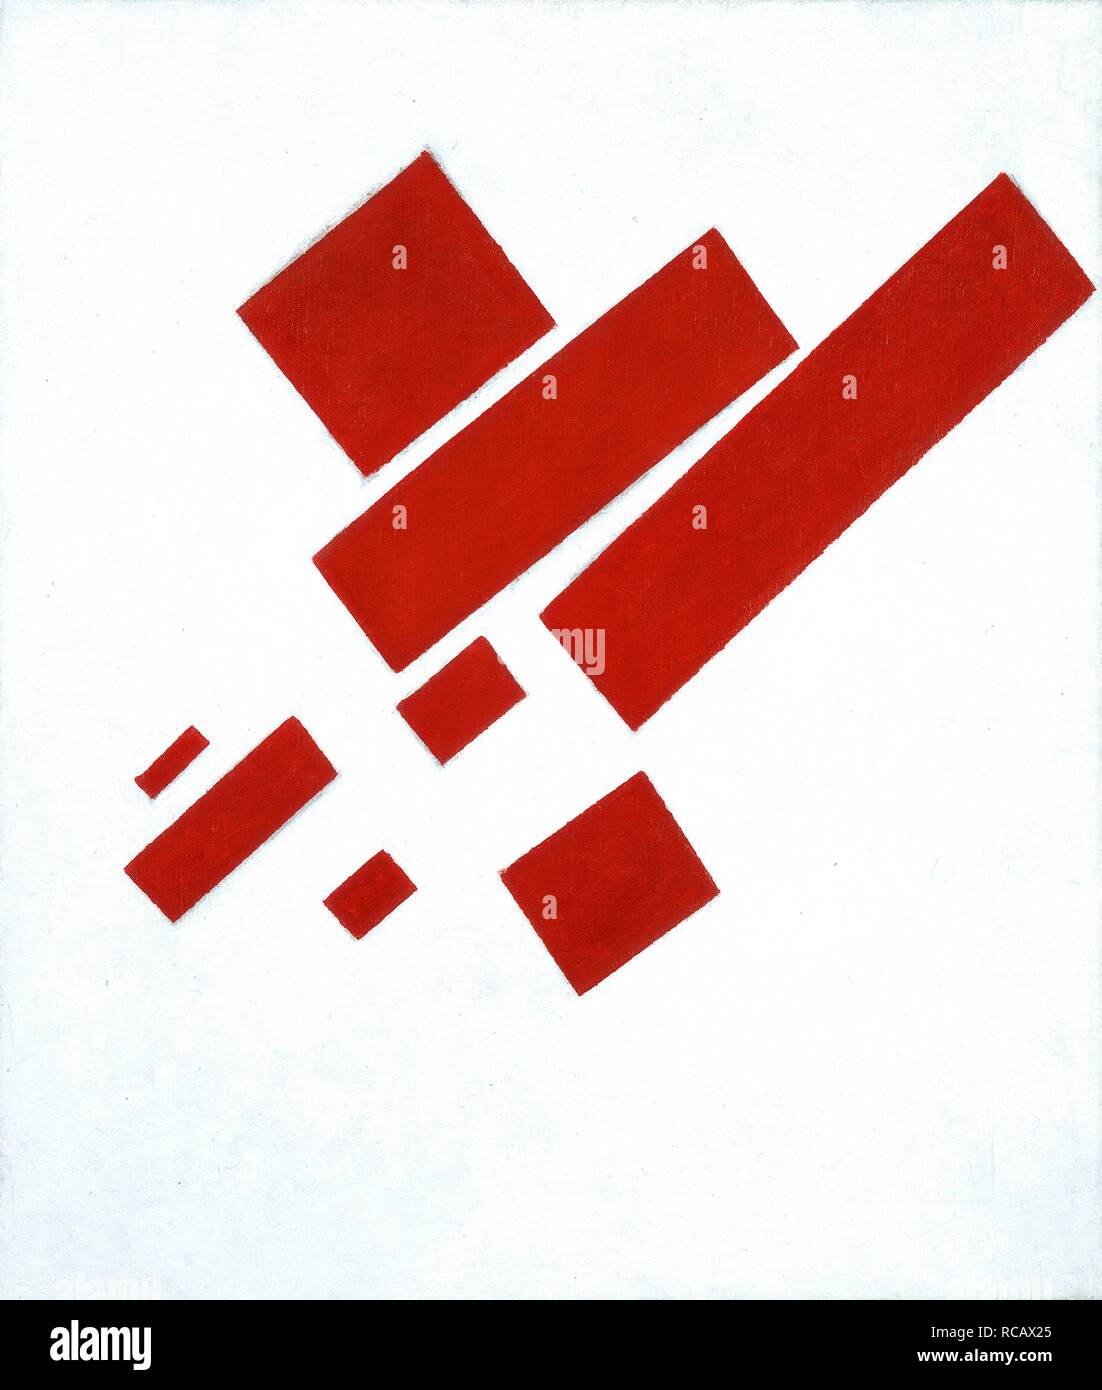 Suprematist Painting (Eight Red Rectangles). Museum: Stedelijk Museum, Amsterdam. Author: Malevich, Kasimir Severinovich. Stock Photo